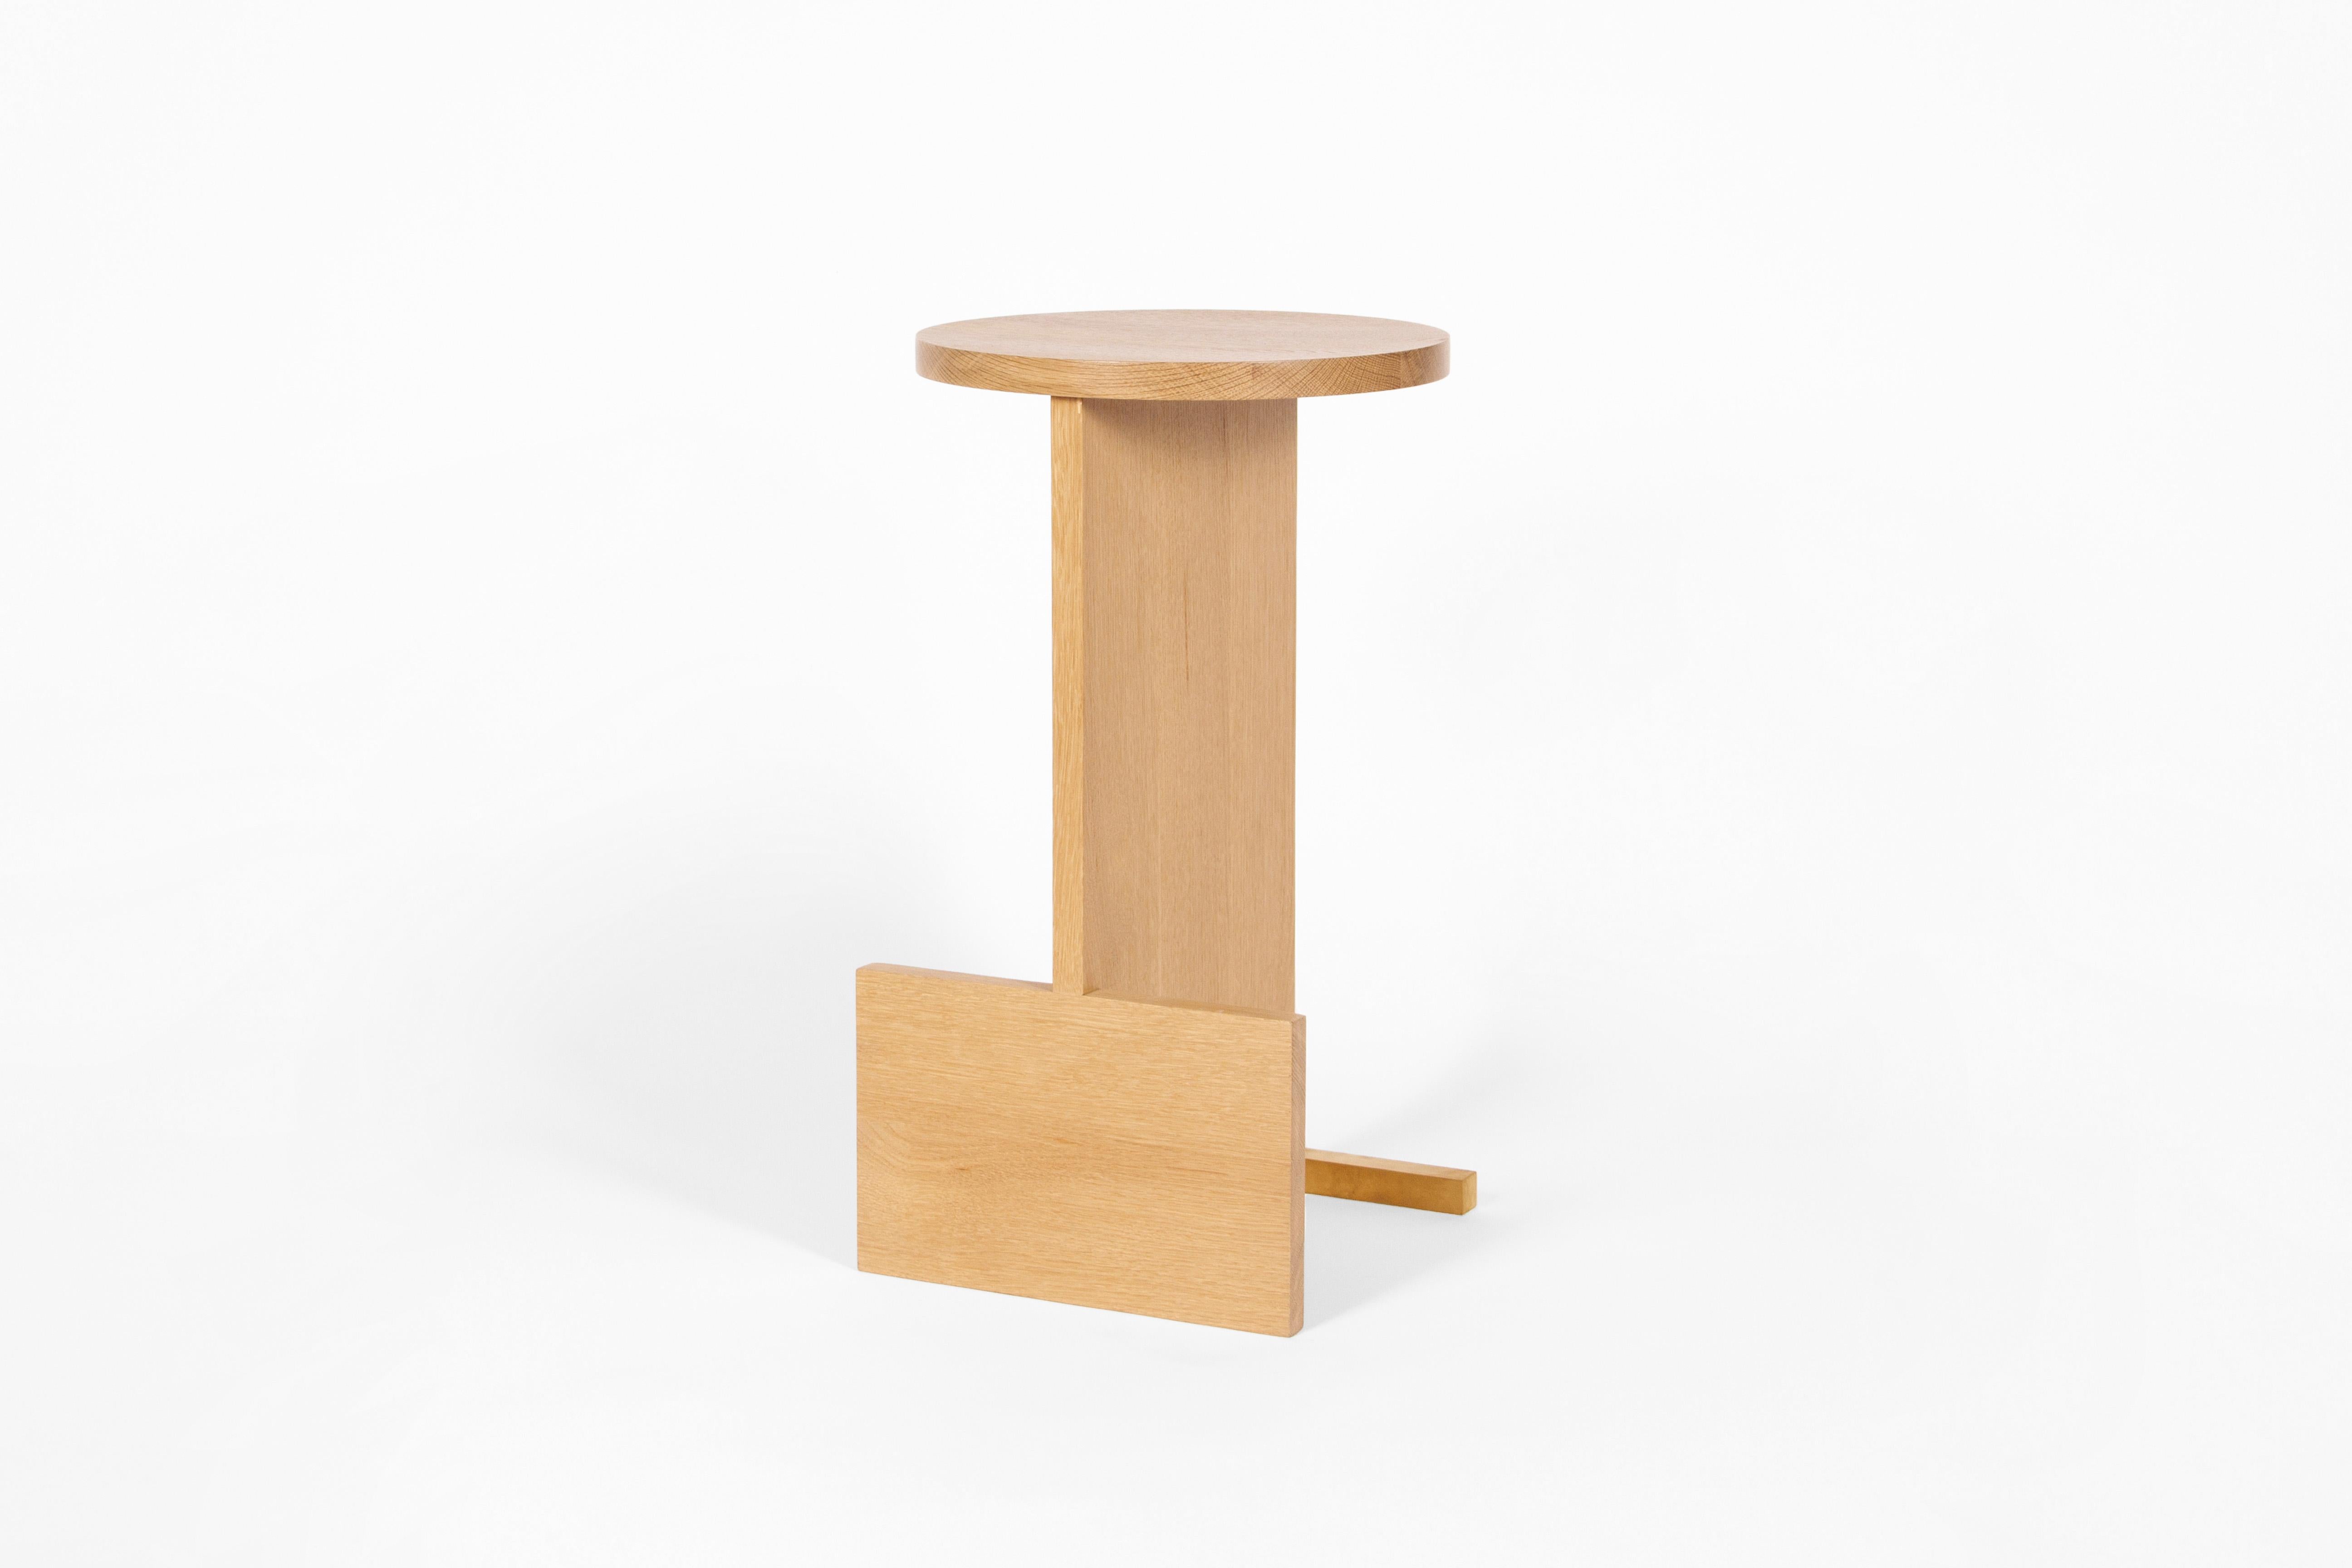 A minimal, timeless counter stool in solid white oak with a brass base detail. This stool can be made for counter or bar height.
Three in stock available now, ready to ship.

Materials: White oak, brass

Made to order also available in: Walnut,